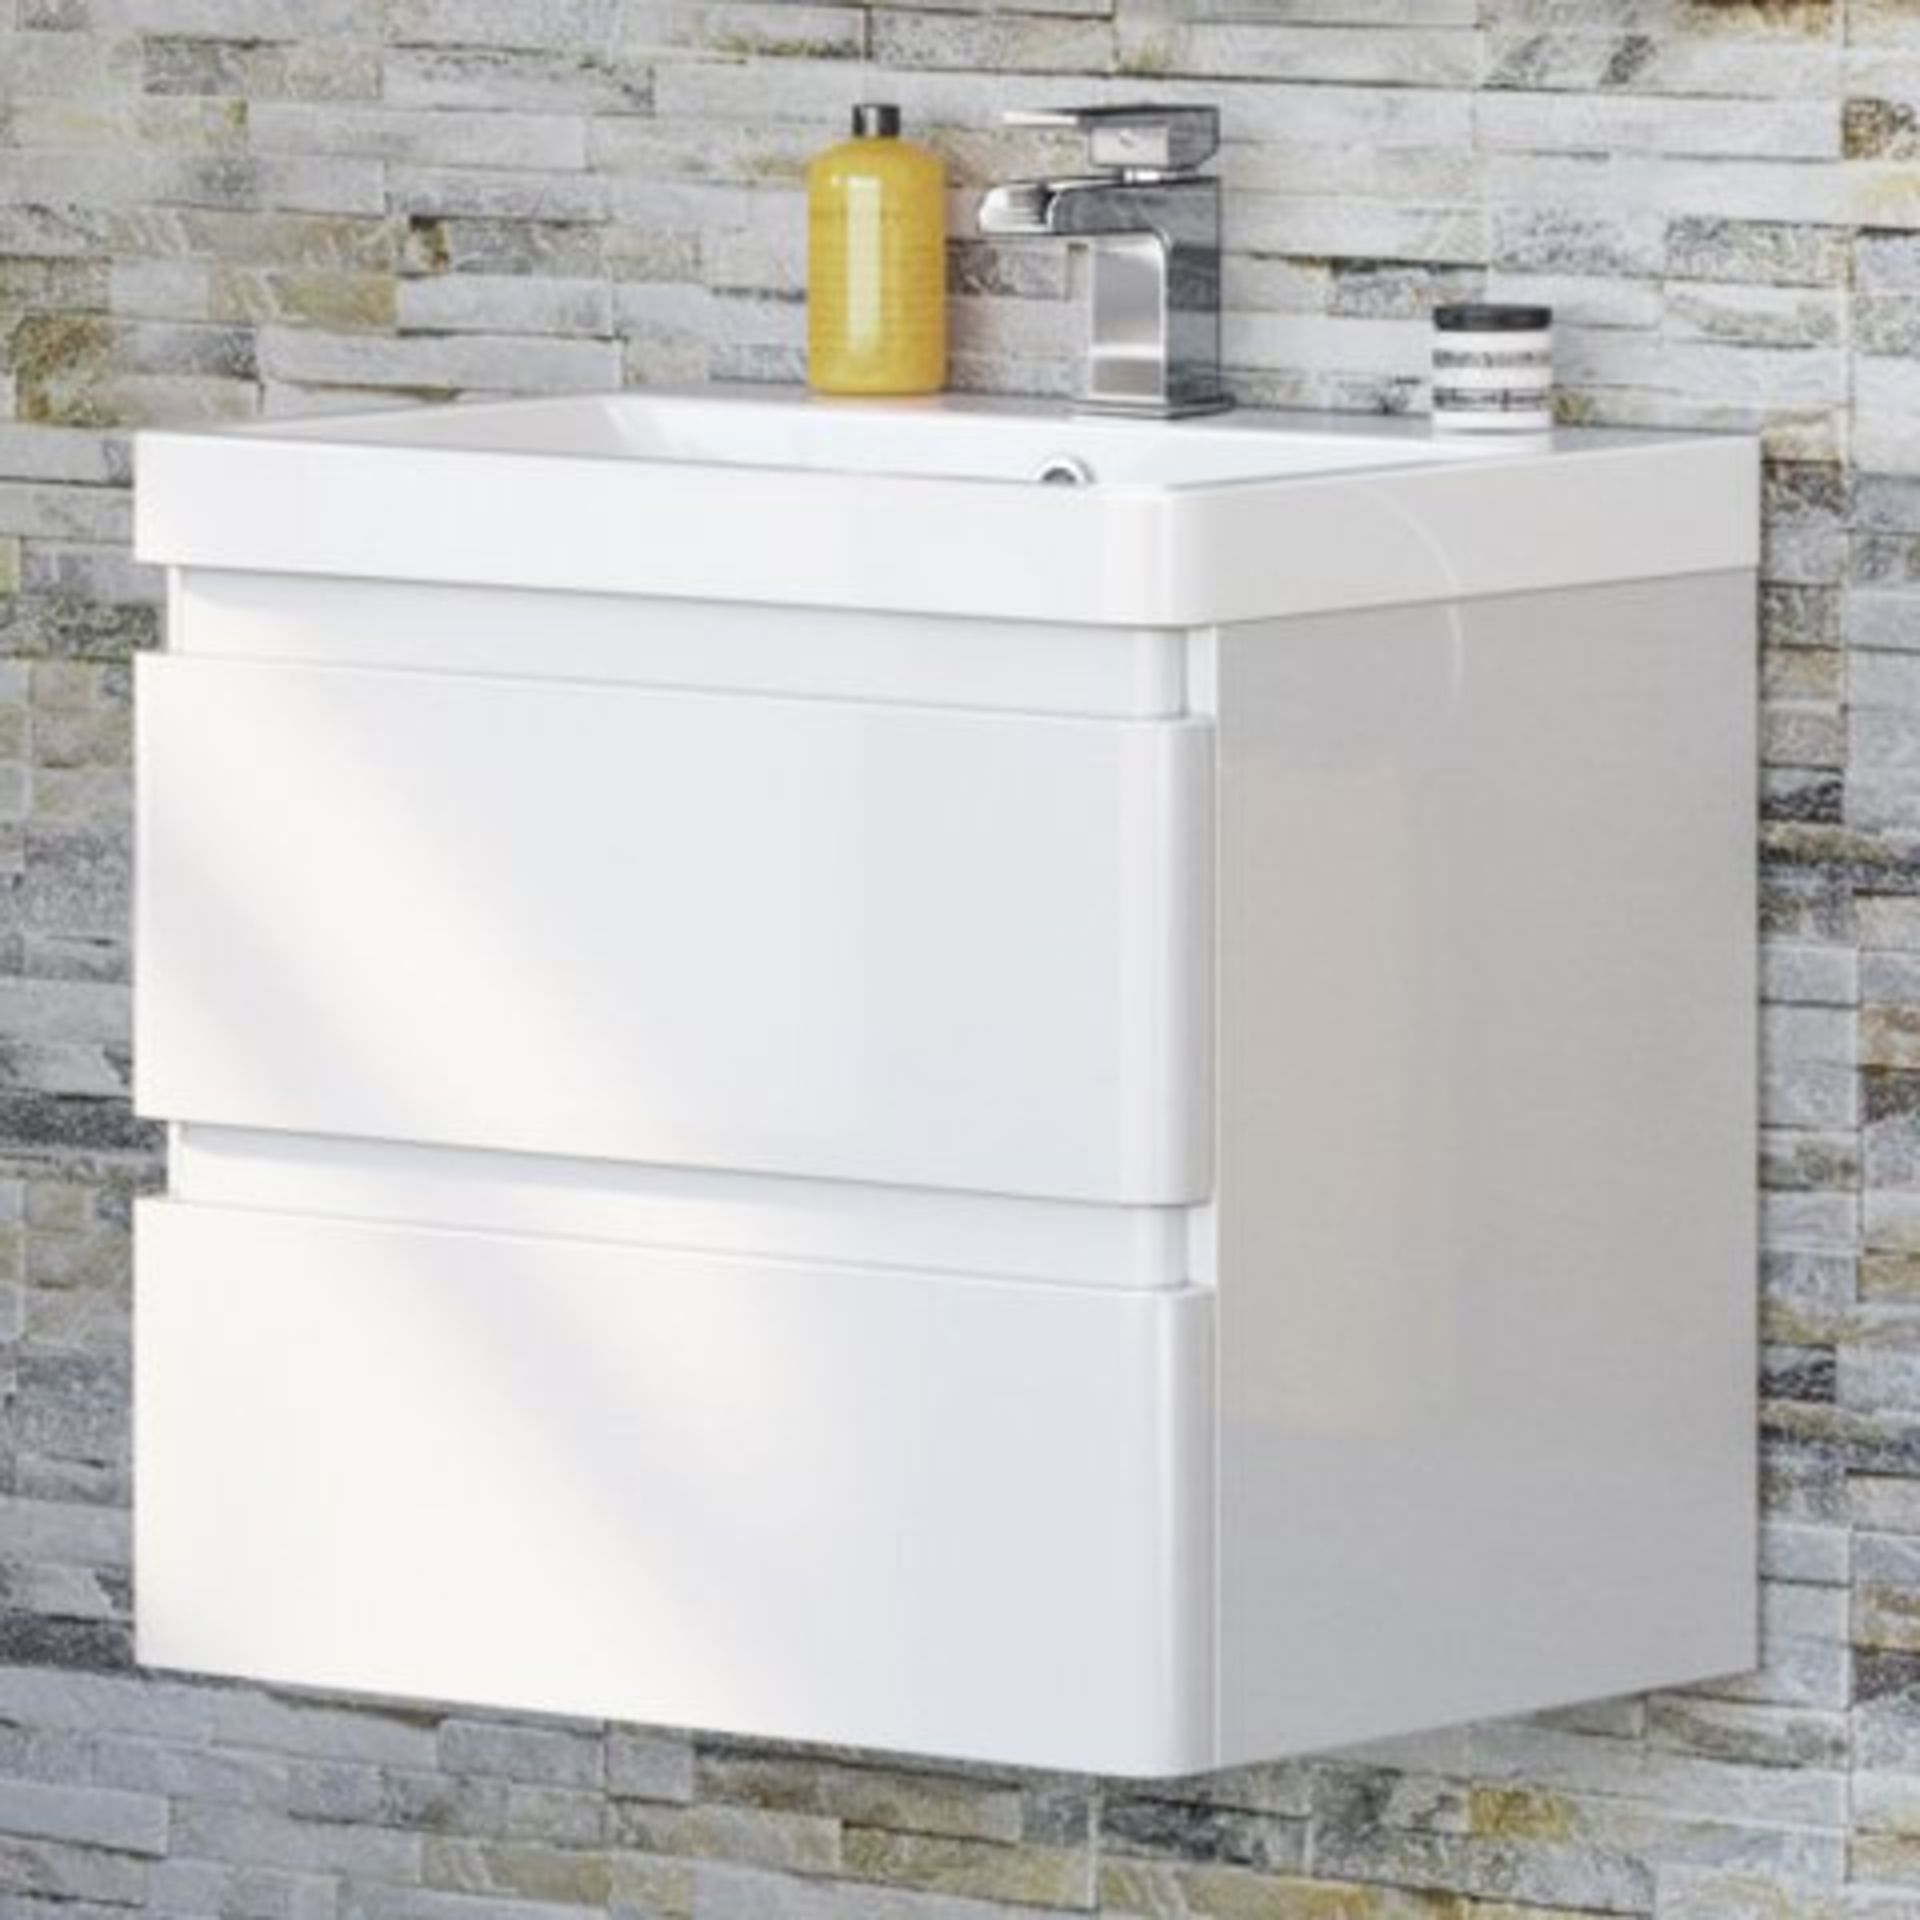 (REF49) 600mm Denver II Gloss White Built In Basin Drawer Unit - Wall Hung. RRP £499.99. WITH BASIN.